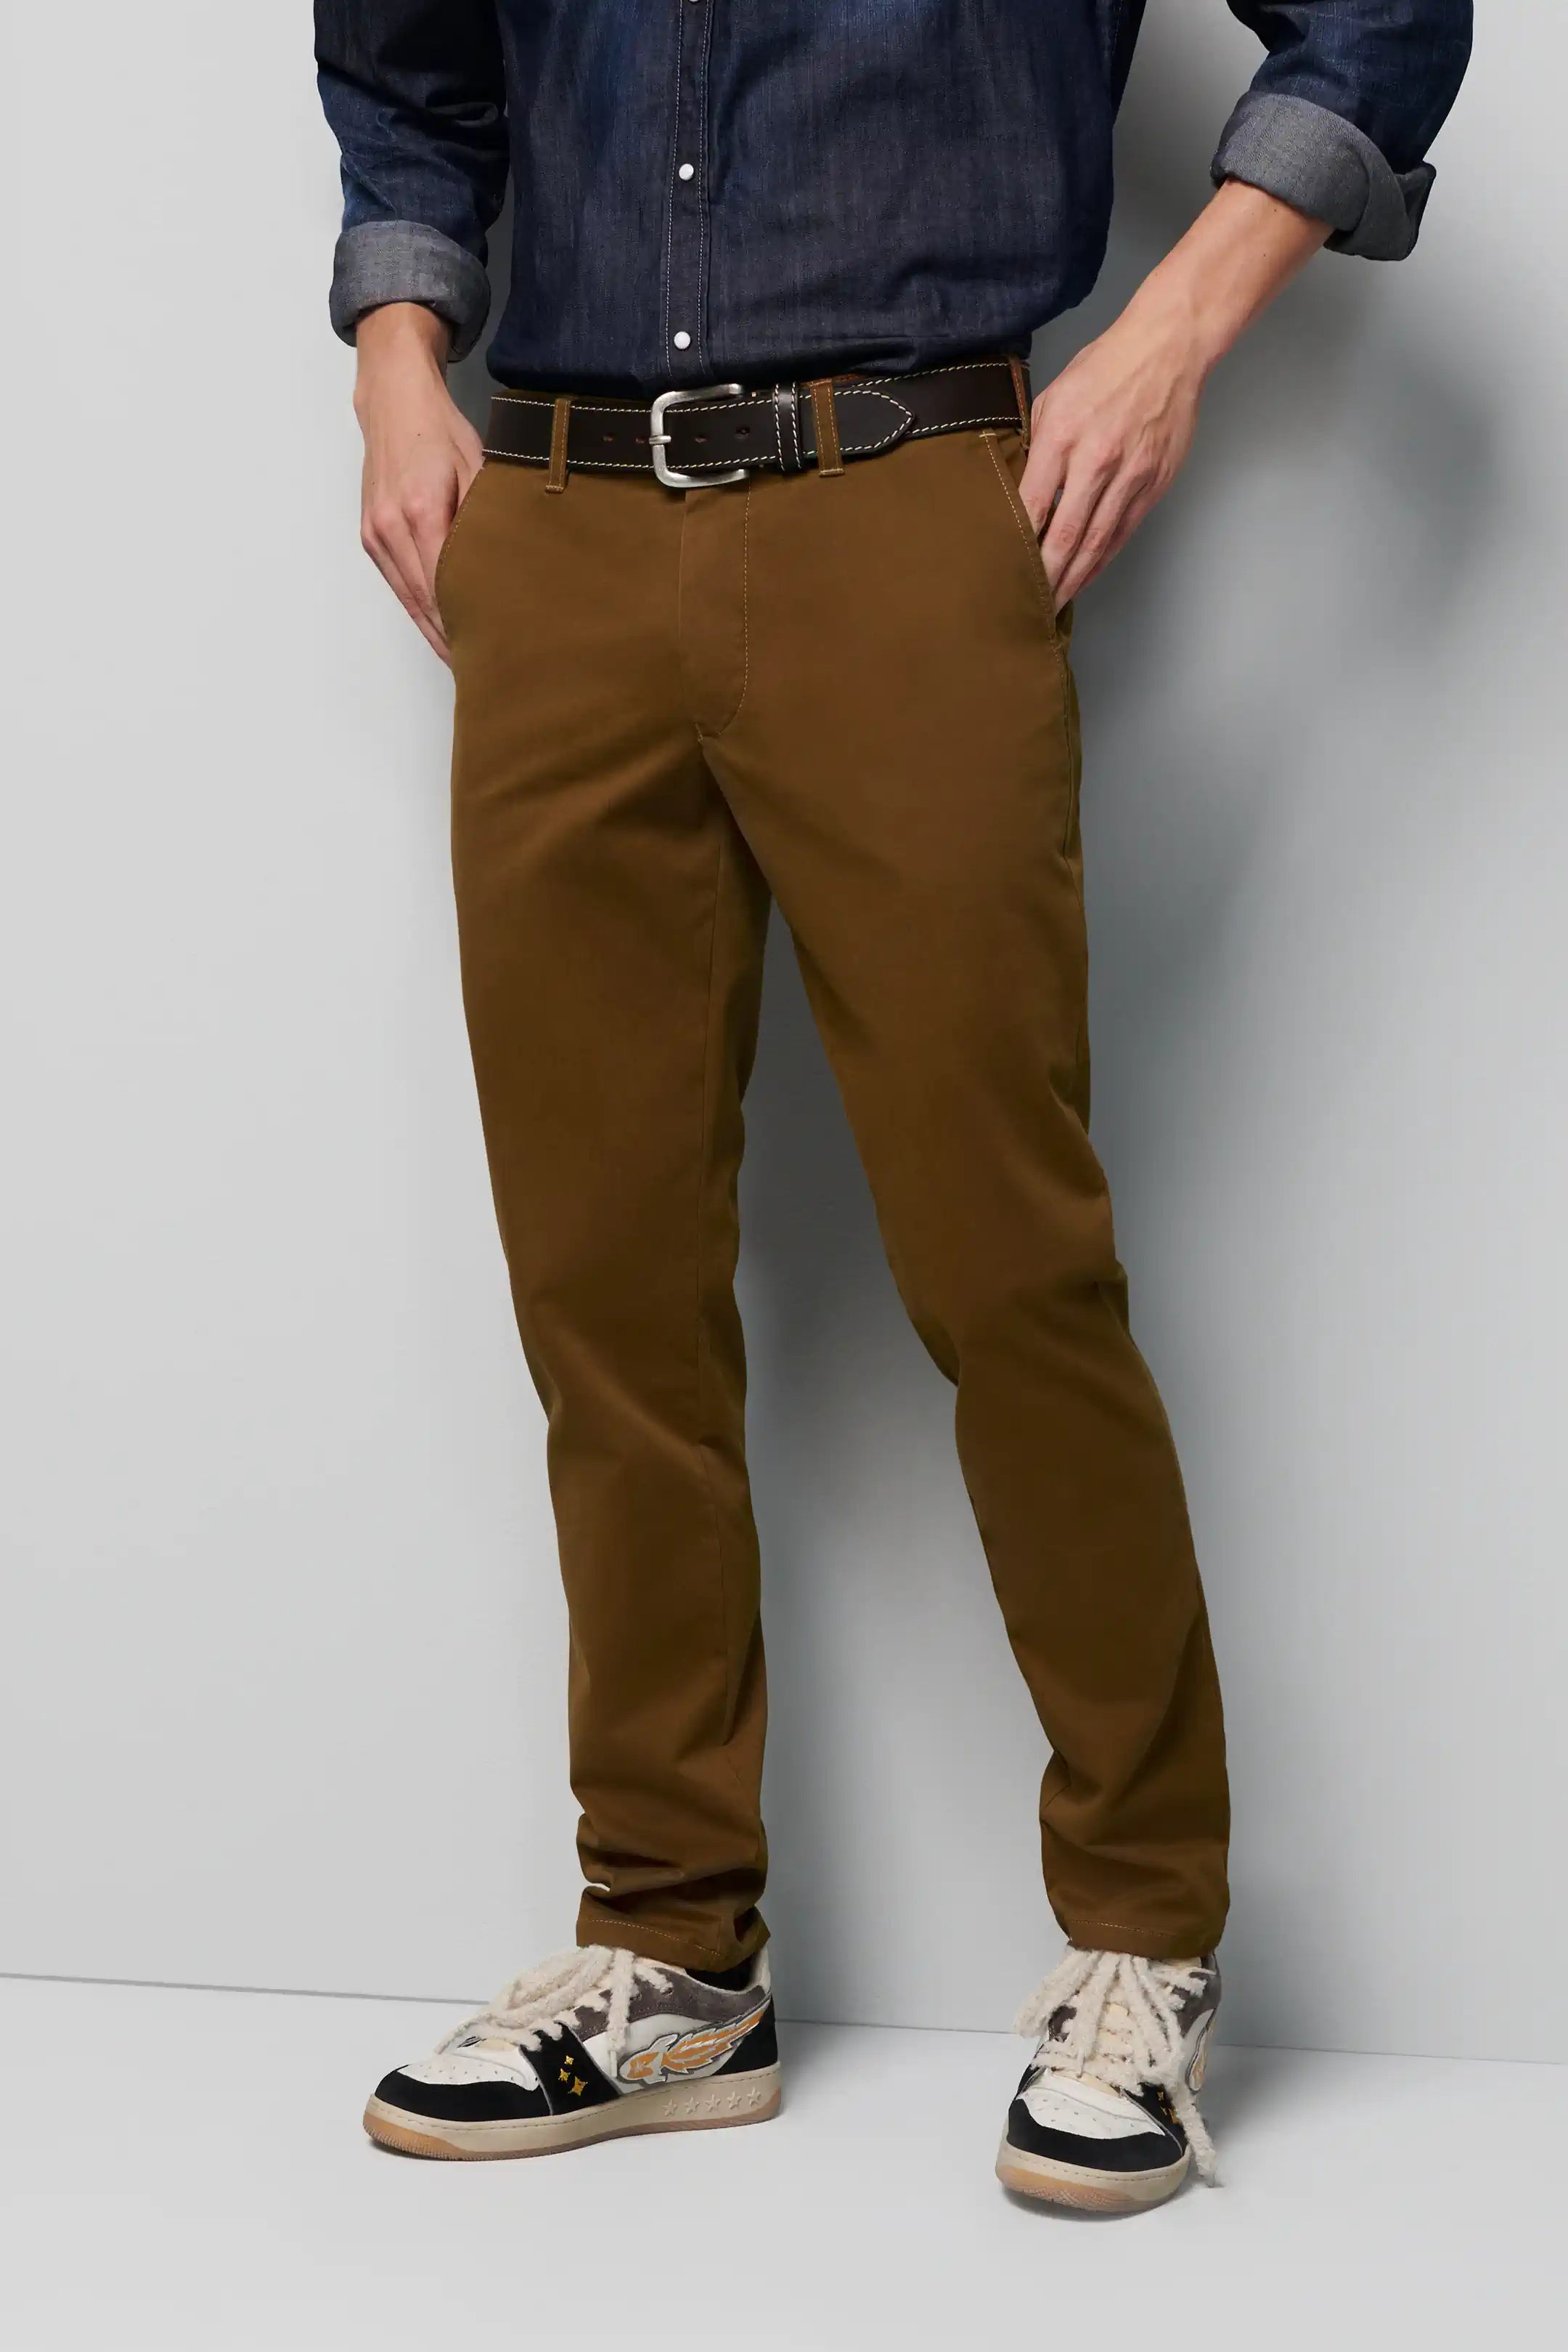 MEYER M5 Trousers - 6001 Soft Stretch Cotton Chinos - Caramel